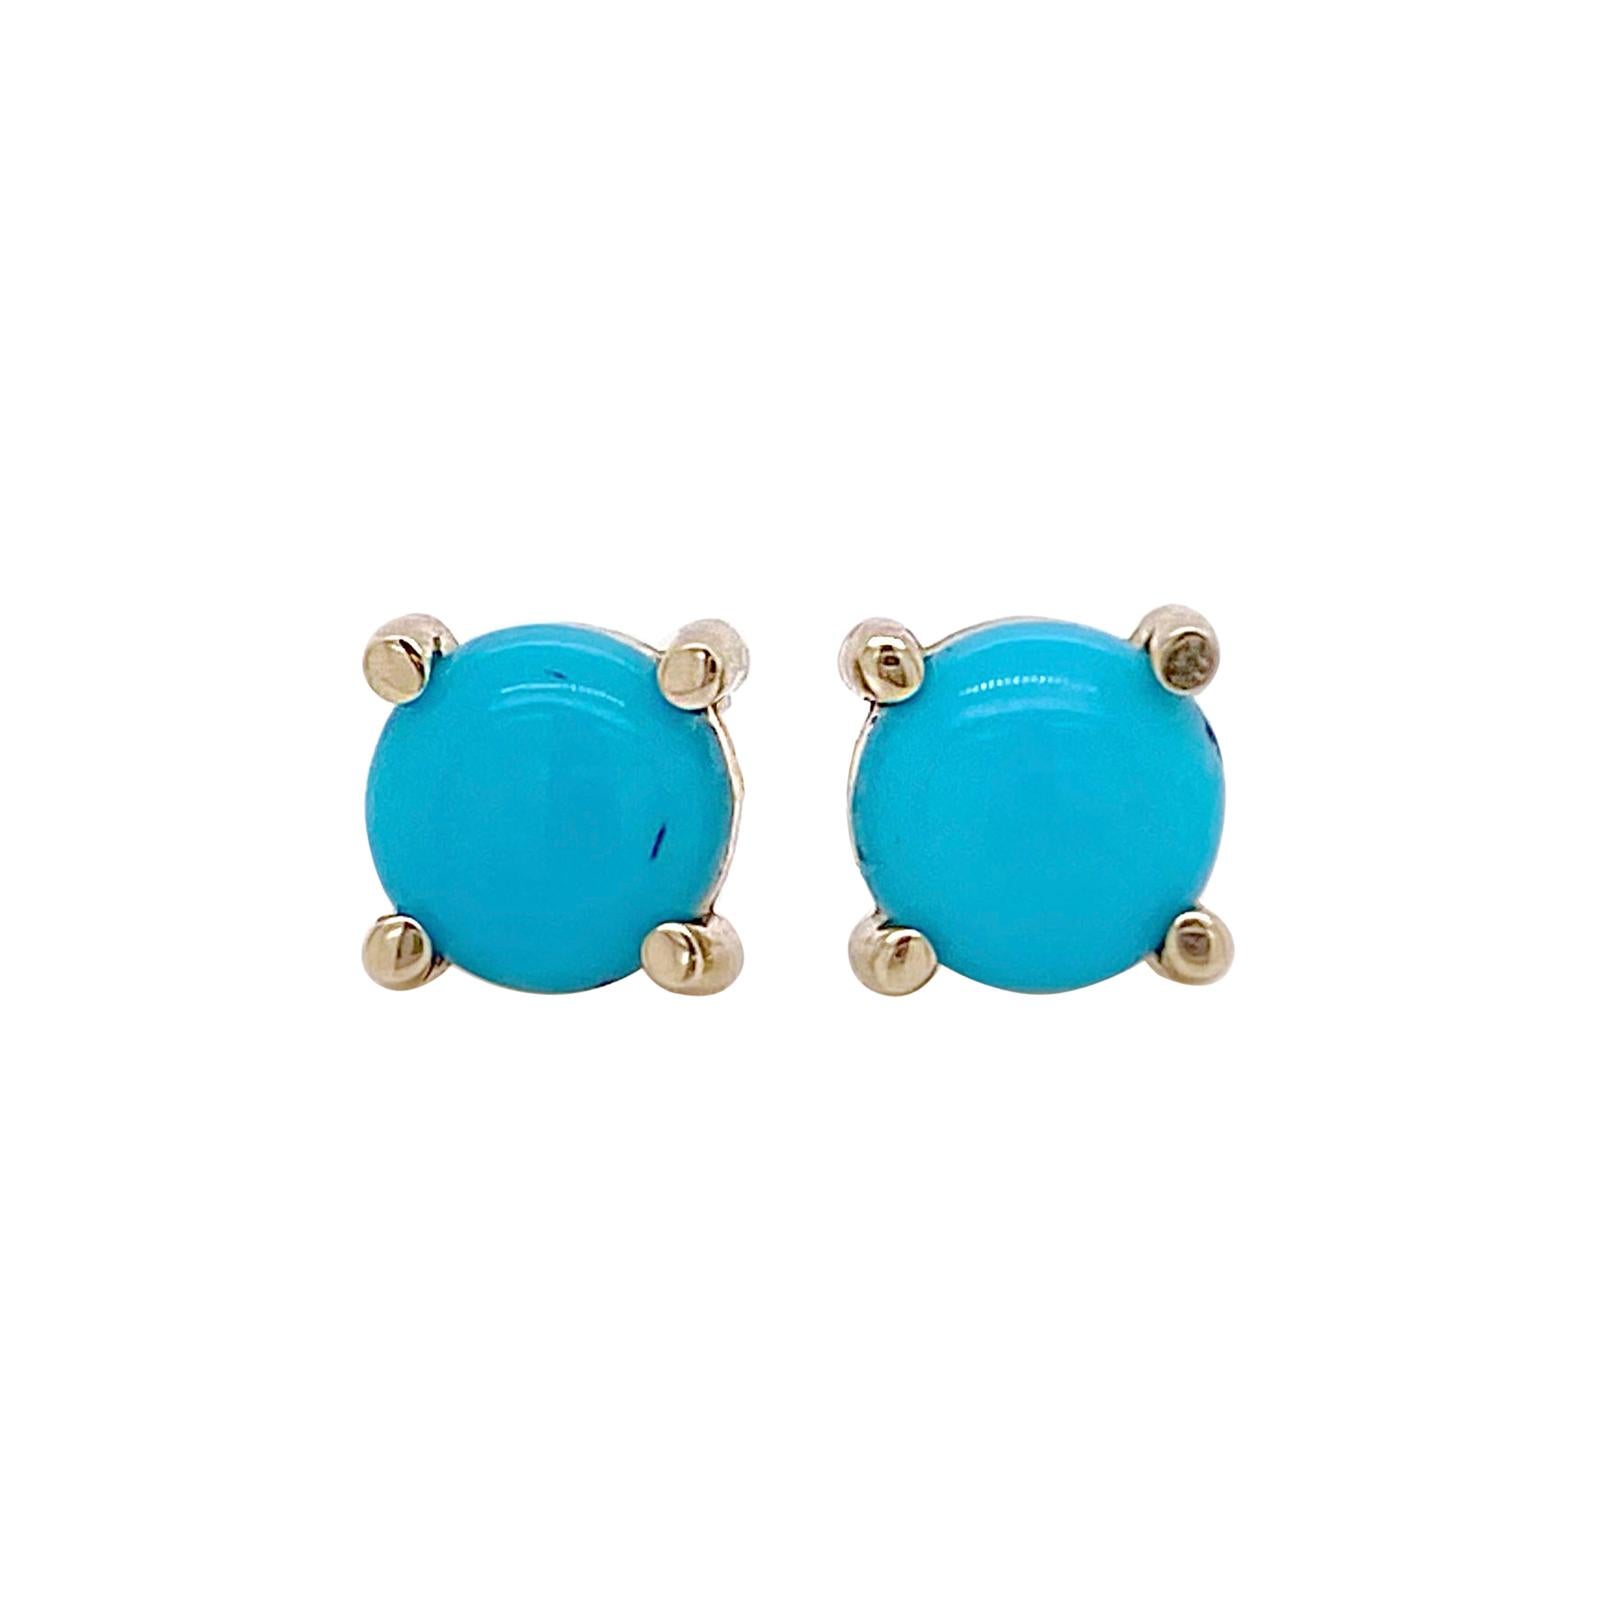 Persian Turquoise Earrings, Round Stud Style in Four Prongs and 14k Yellow Gold